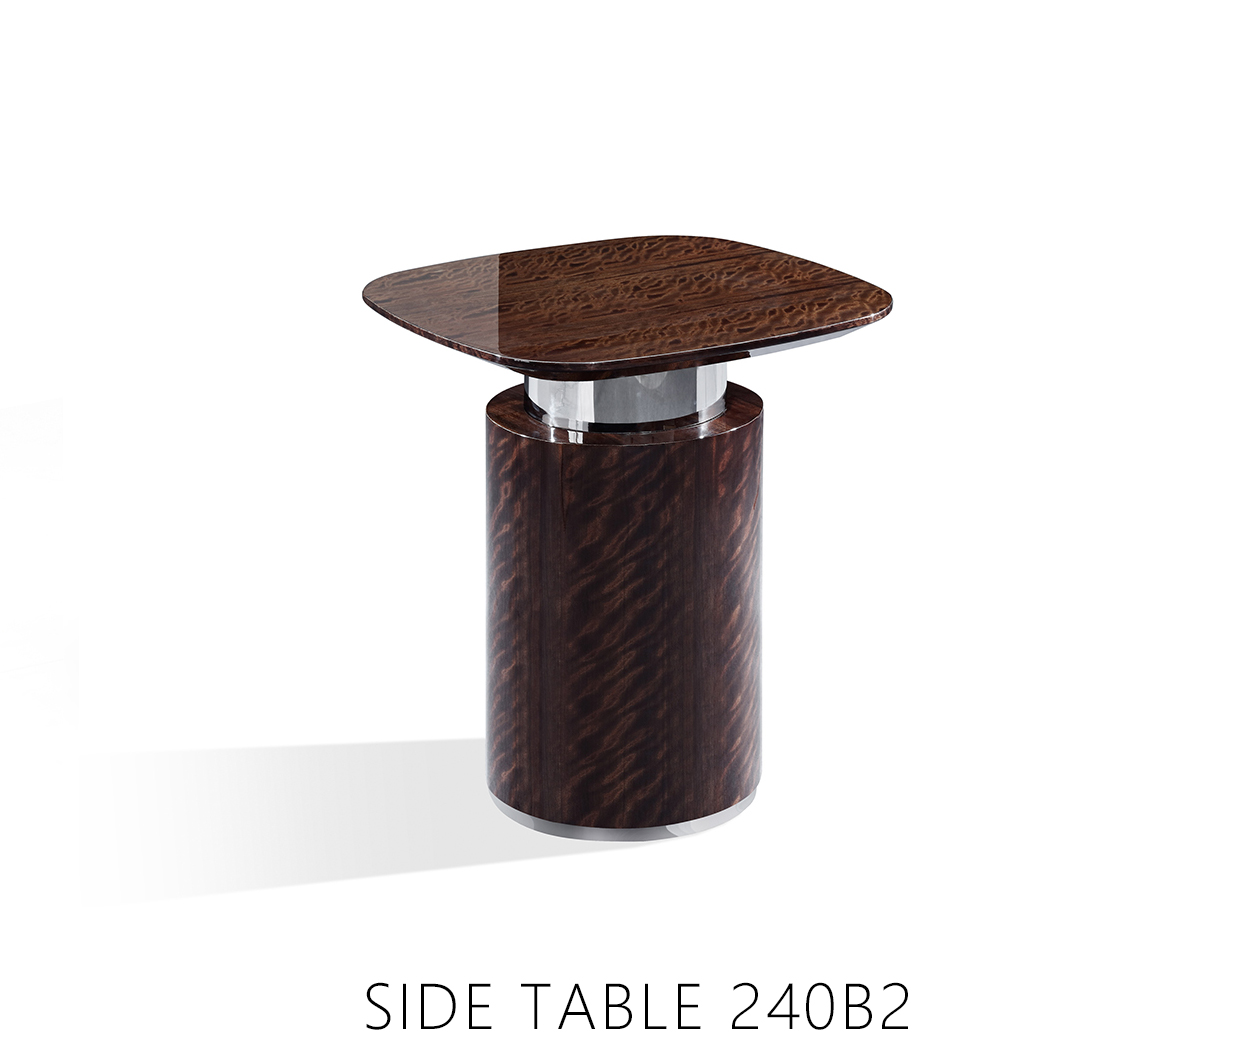 SIDE TABLE 240B2